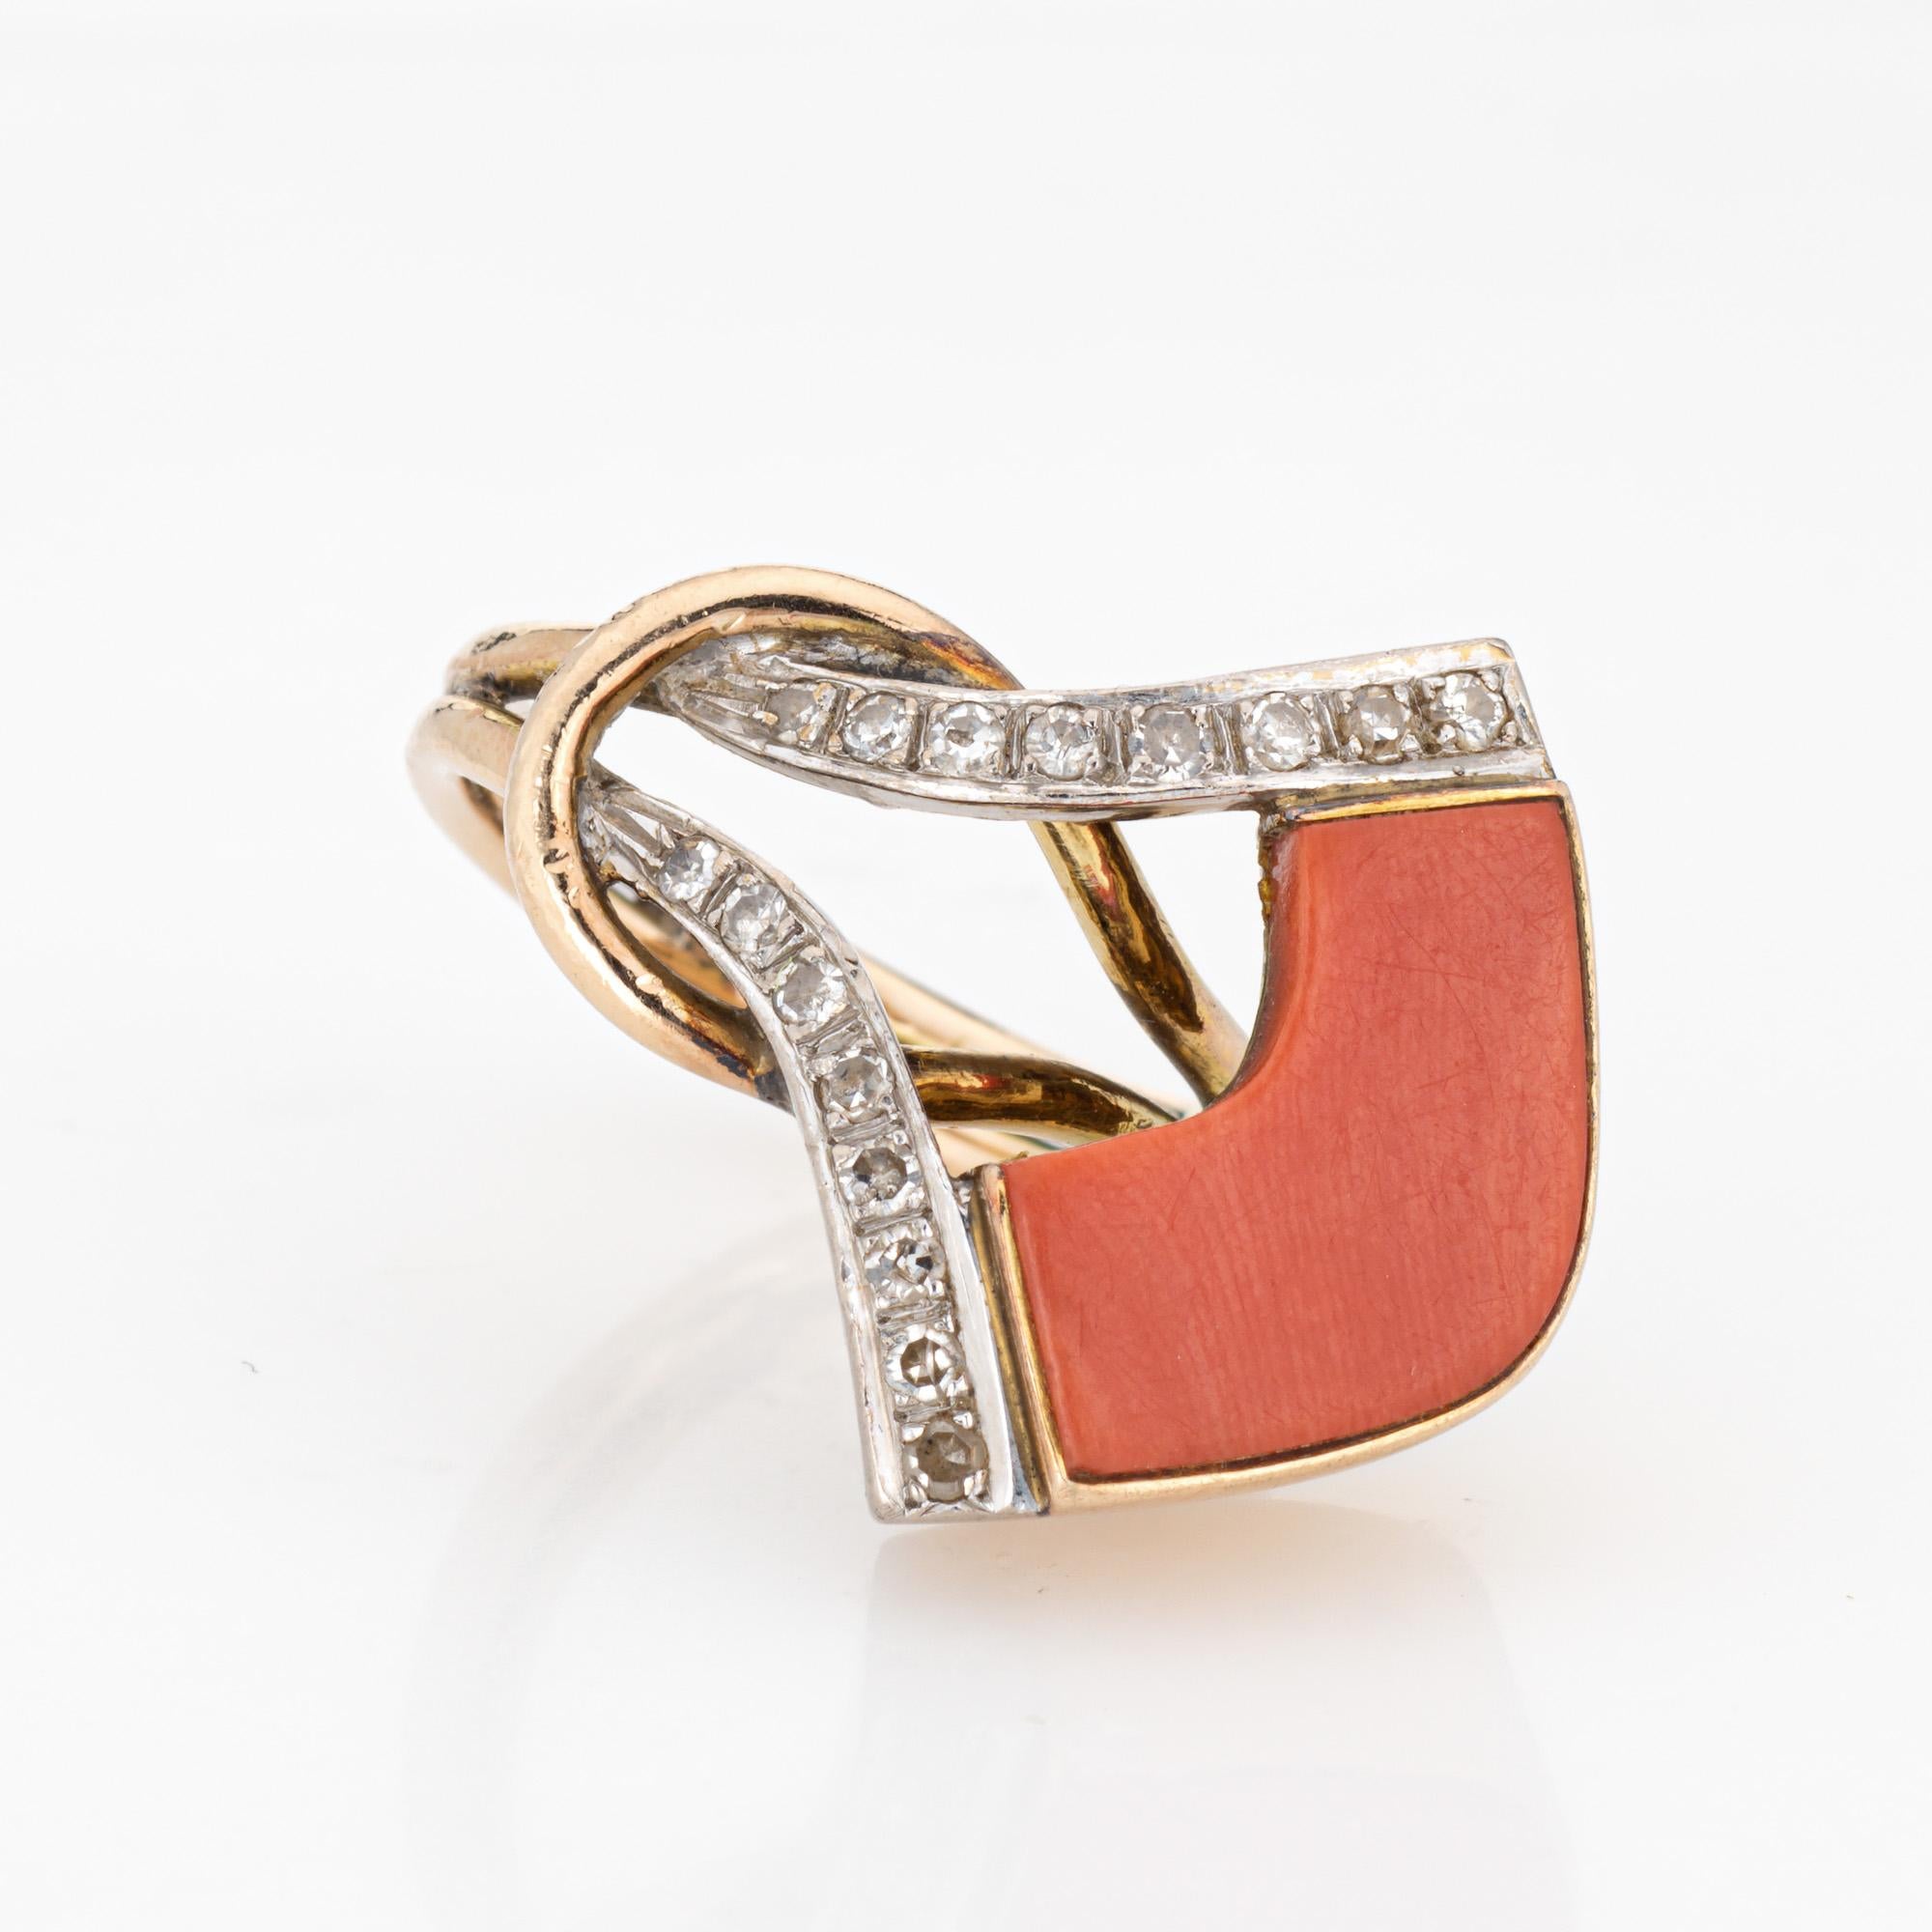 Finely detailed vintage coral & diamond cocktail ring, crafted in 14 karat yellow gold (circa 1970s). 

One piece of salmon hued coral measures 15mm x 6mm. 16 single cut diamonds total an estimated 0.10 carats (estimated at H-I color and SI1-I2